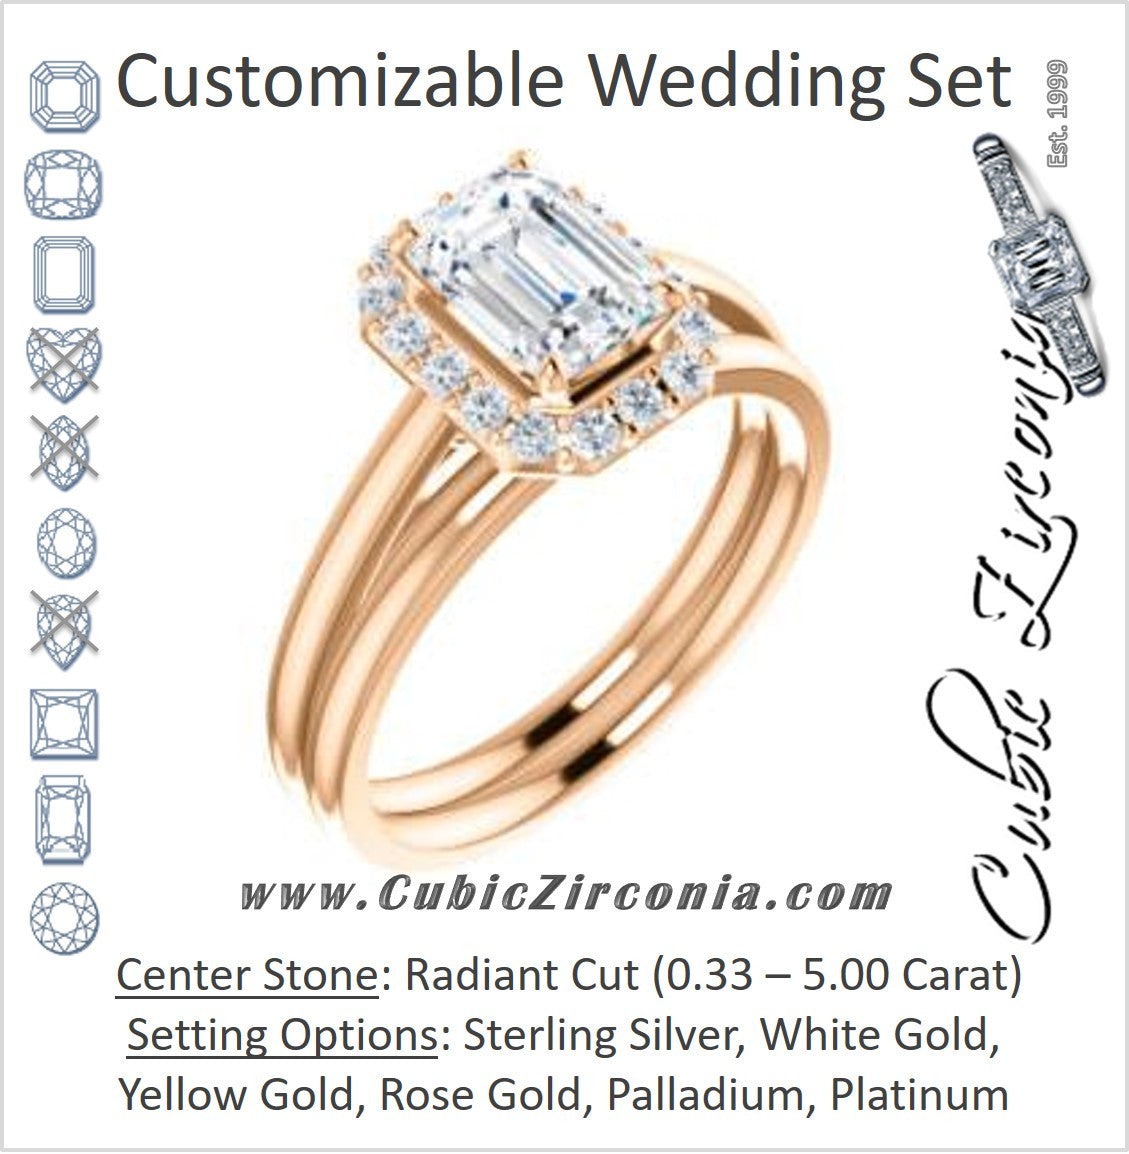 CZ Wedding Set, featuring The Tyra engagement ring (Customizable Cathedral-set Radiant Cut Style with Halo, Decorative Trellis and Thin Band)